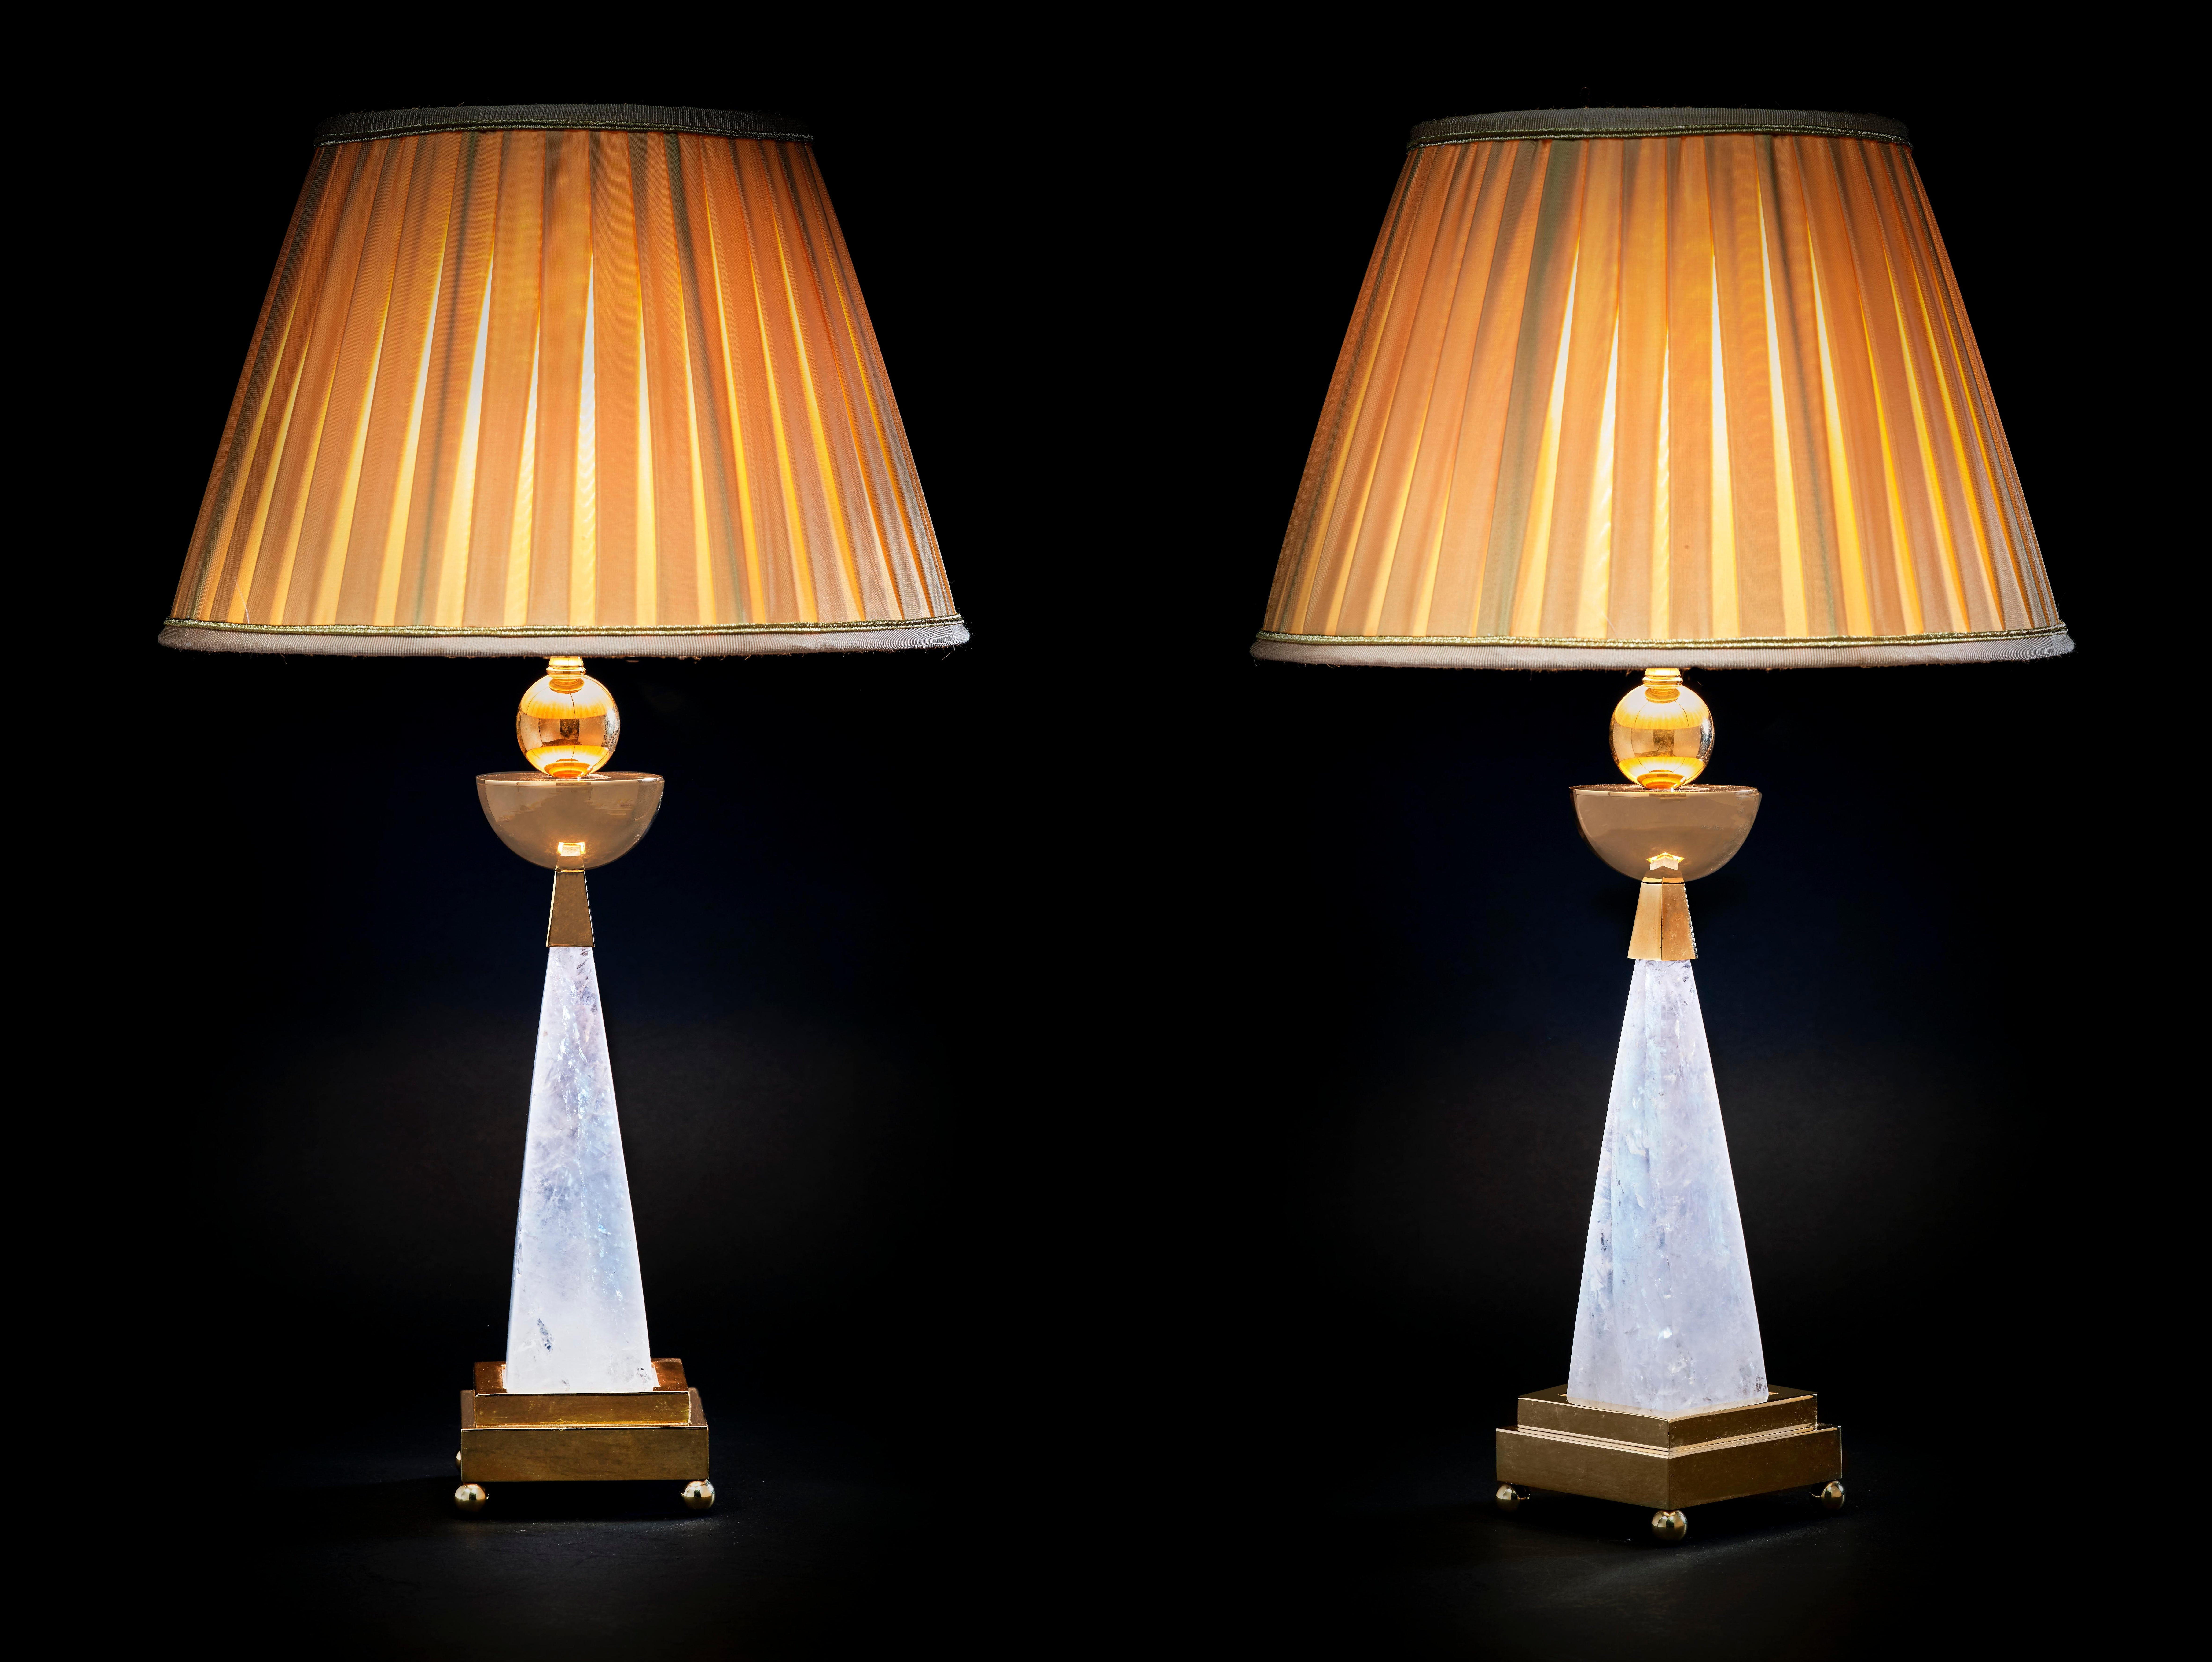 Pair of AIKO 2 rock crystal pair of lamps.
24-karat gold-plated 
handmade in brass in France
Design by Alexandre Vossion.